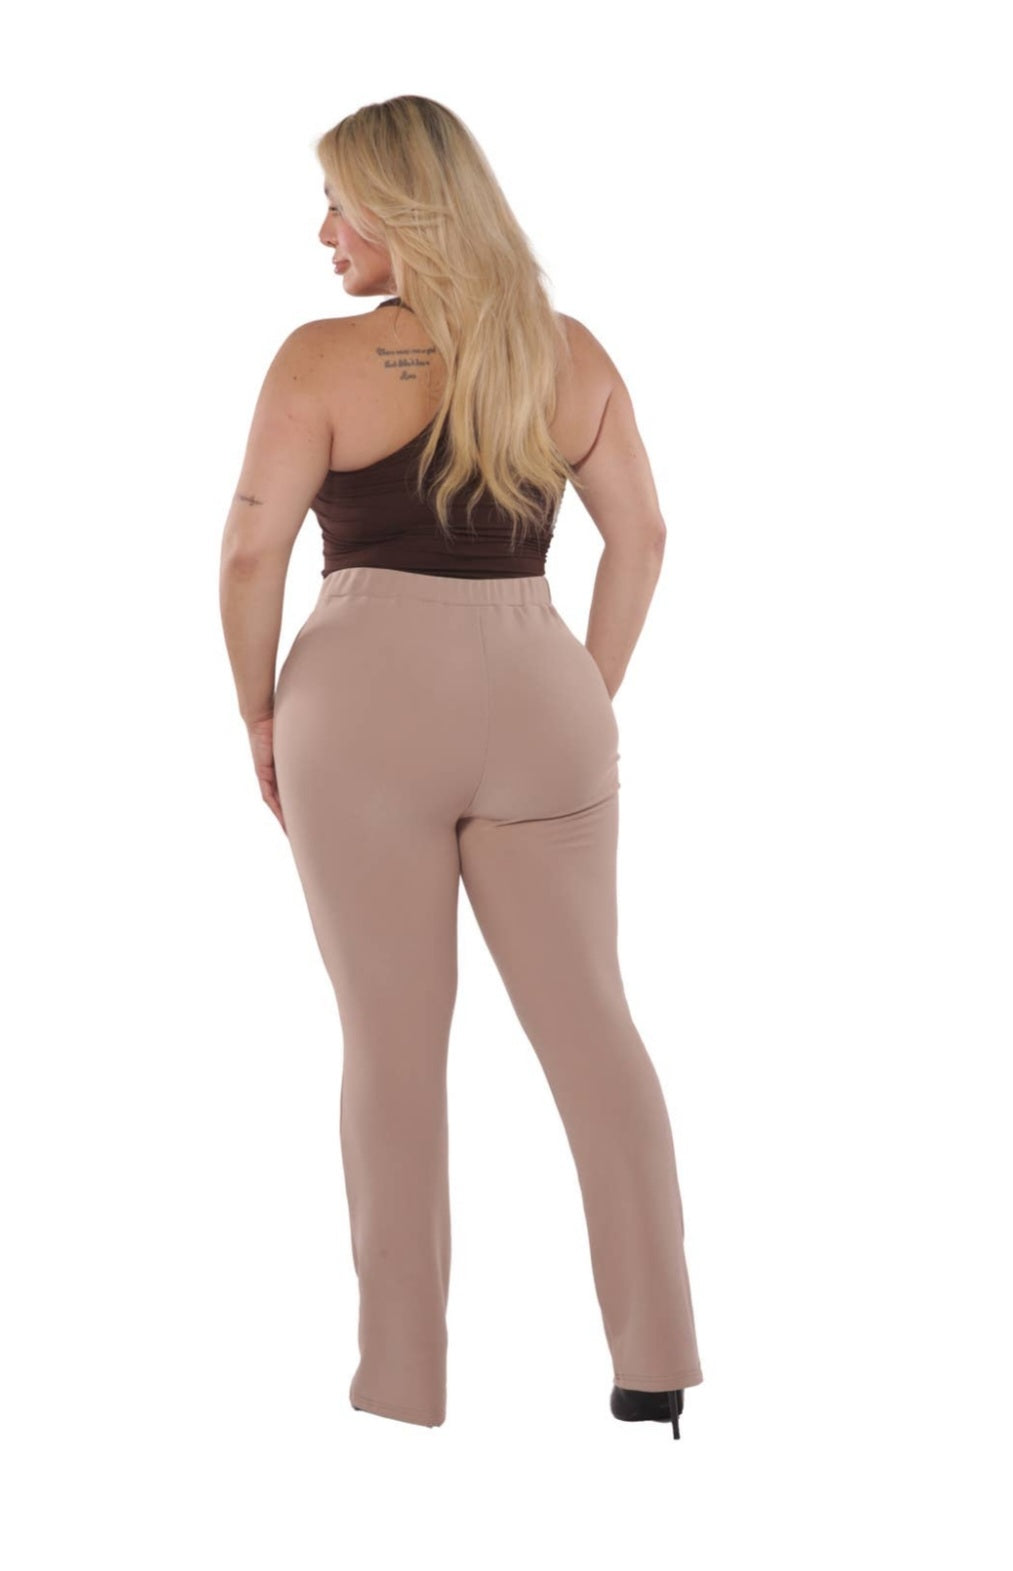 Women's flare pants with seam detail and waist tie